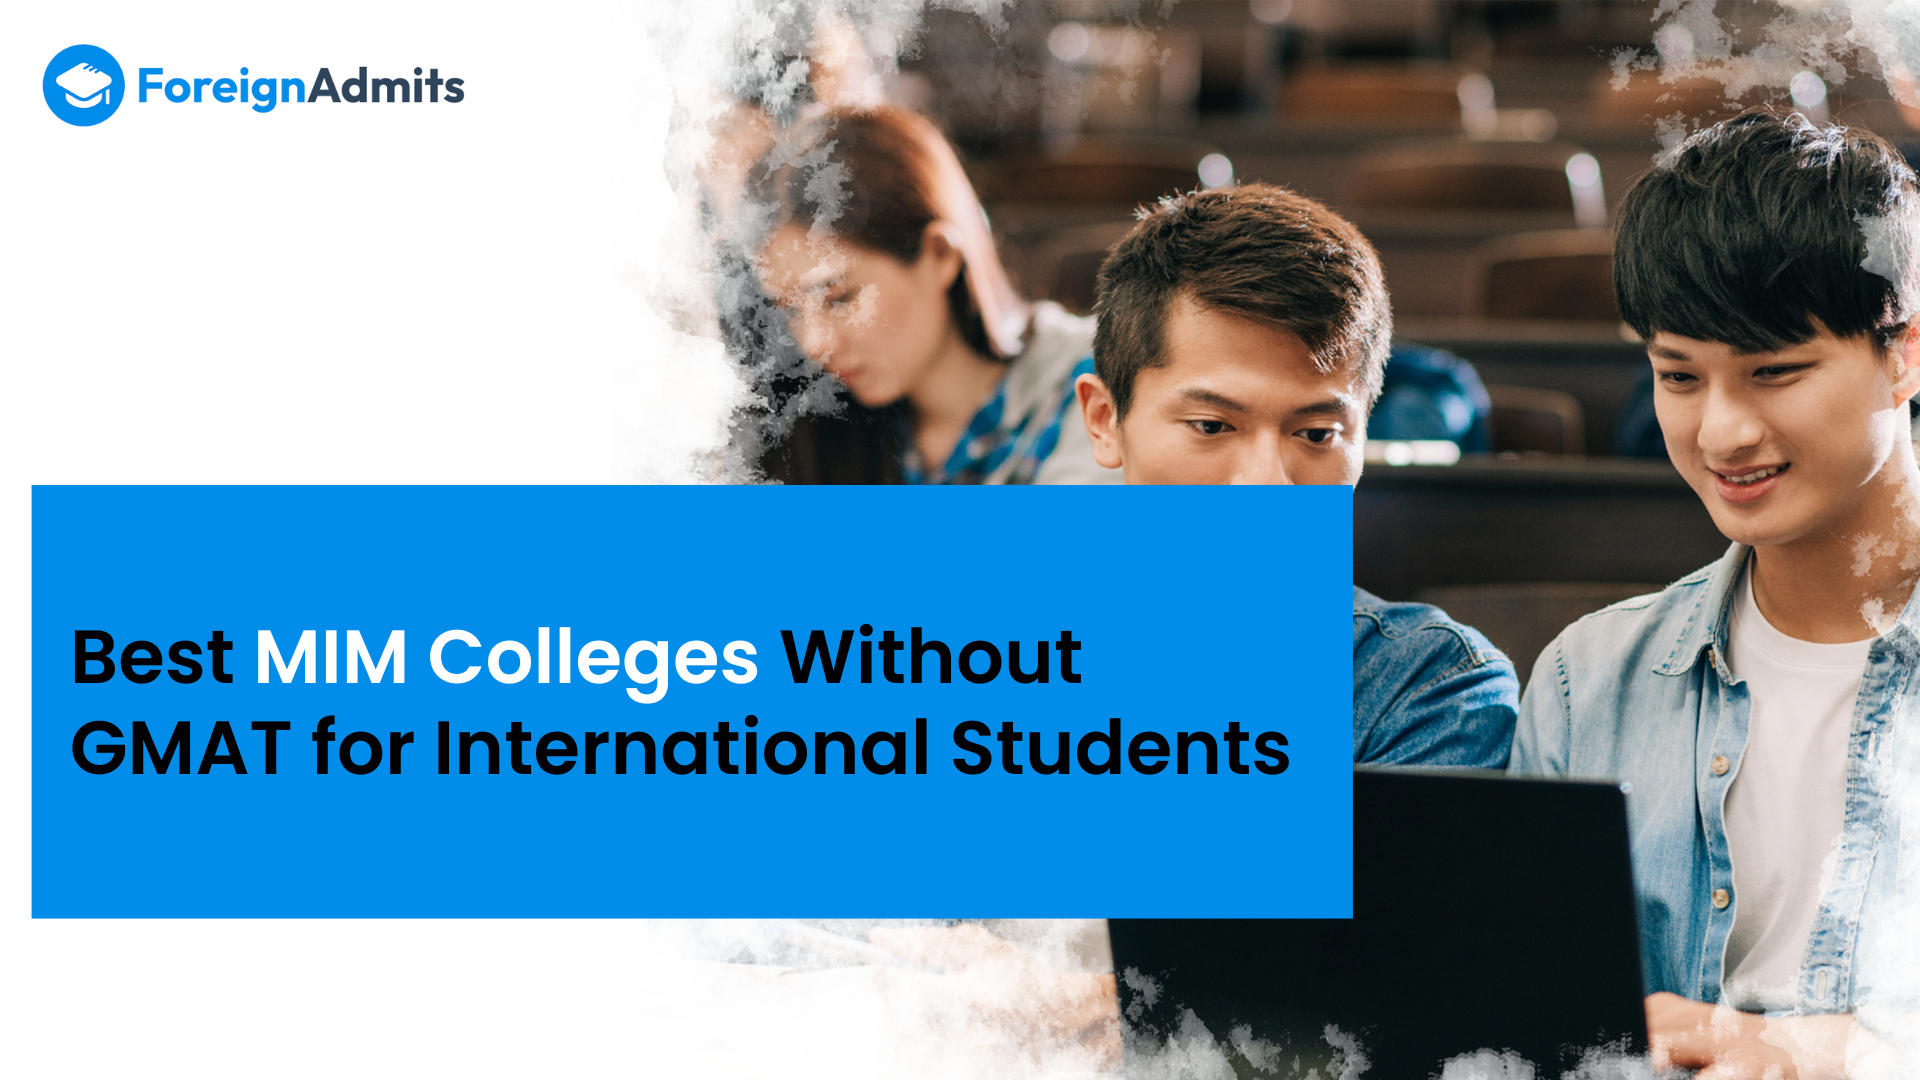 Best MIM Colleges Without GMAT for International Students